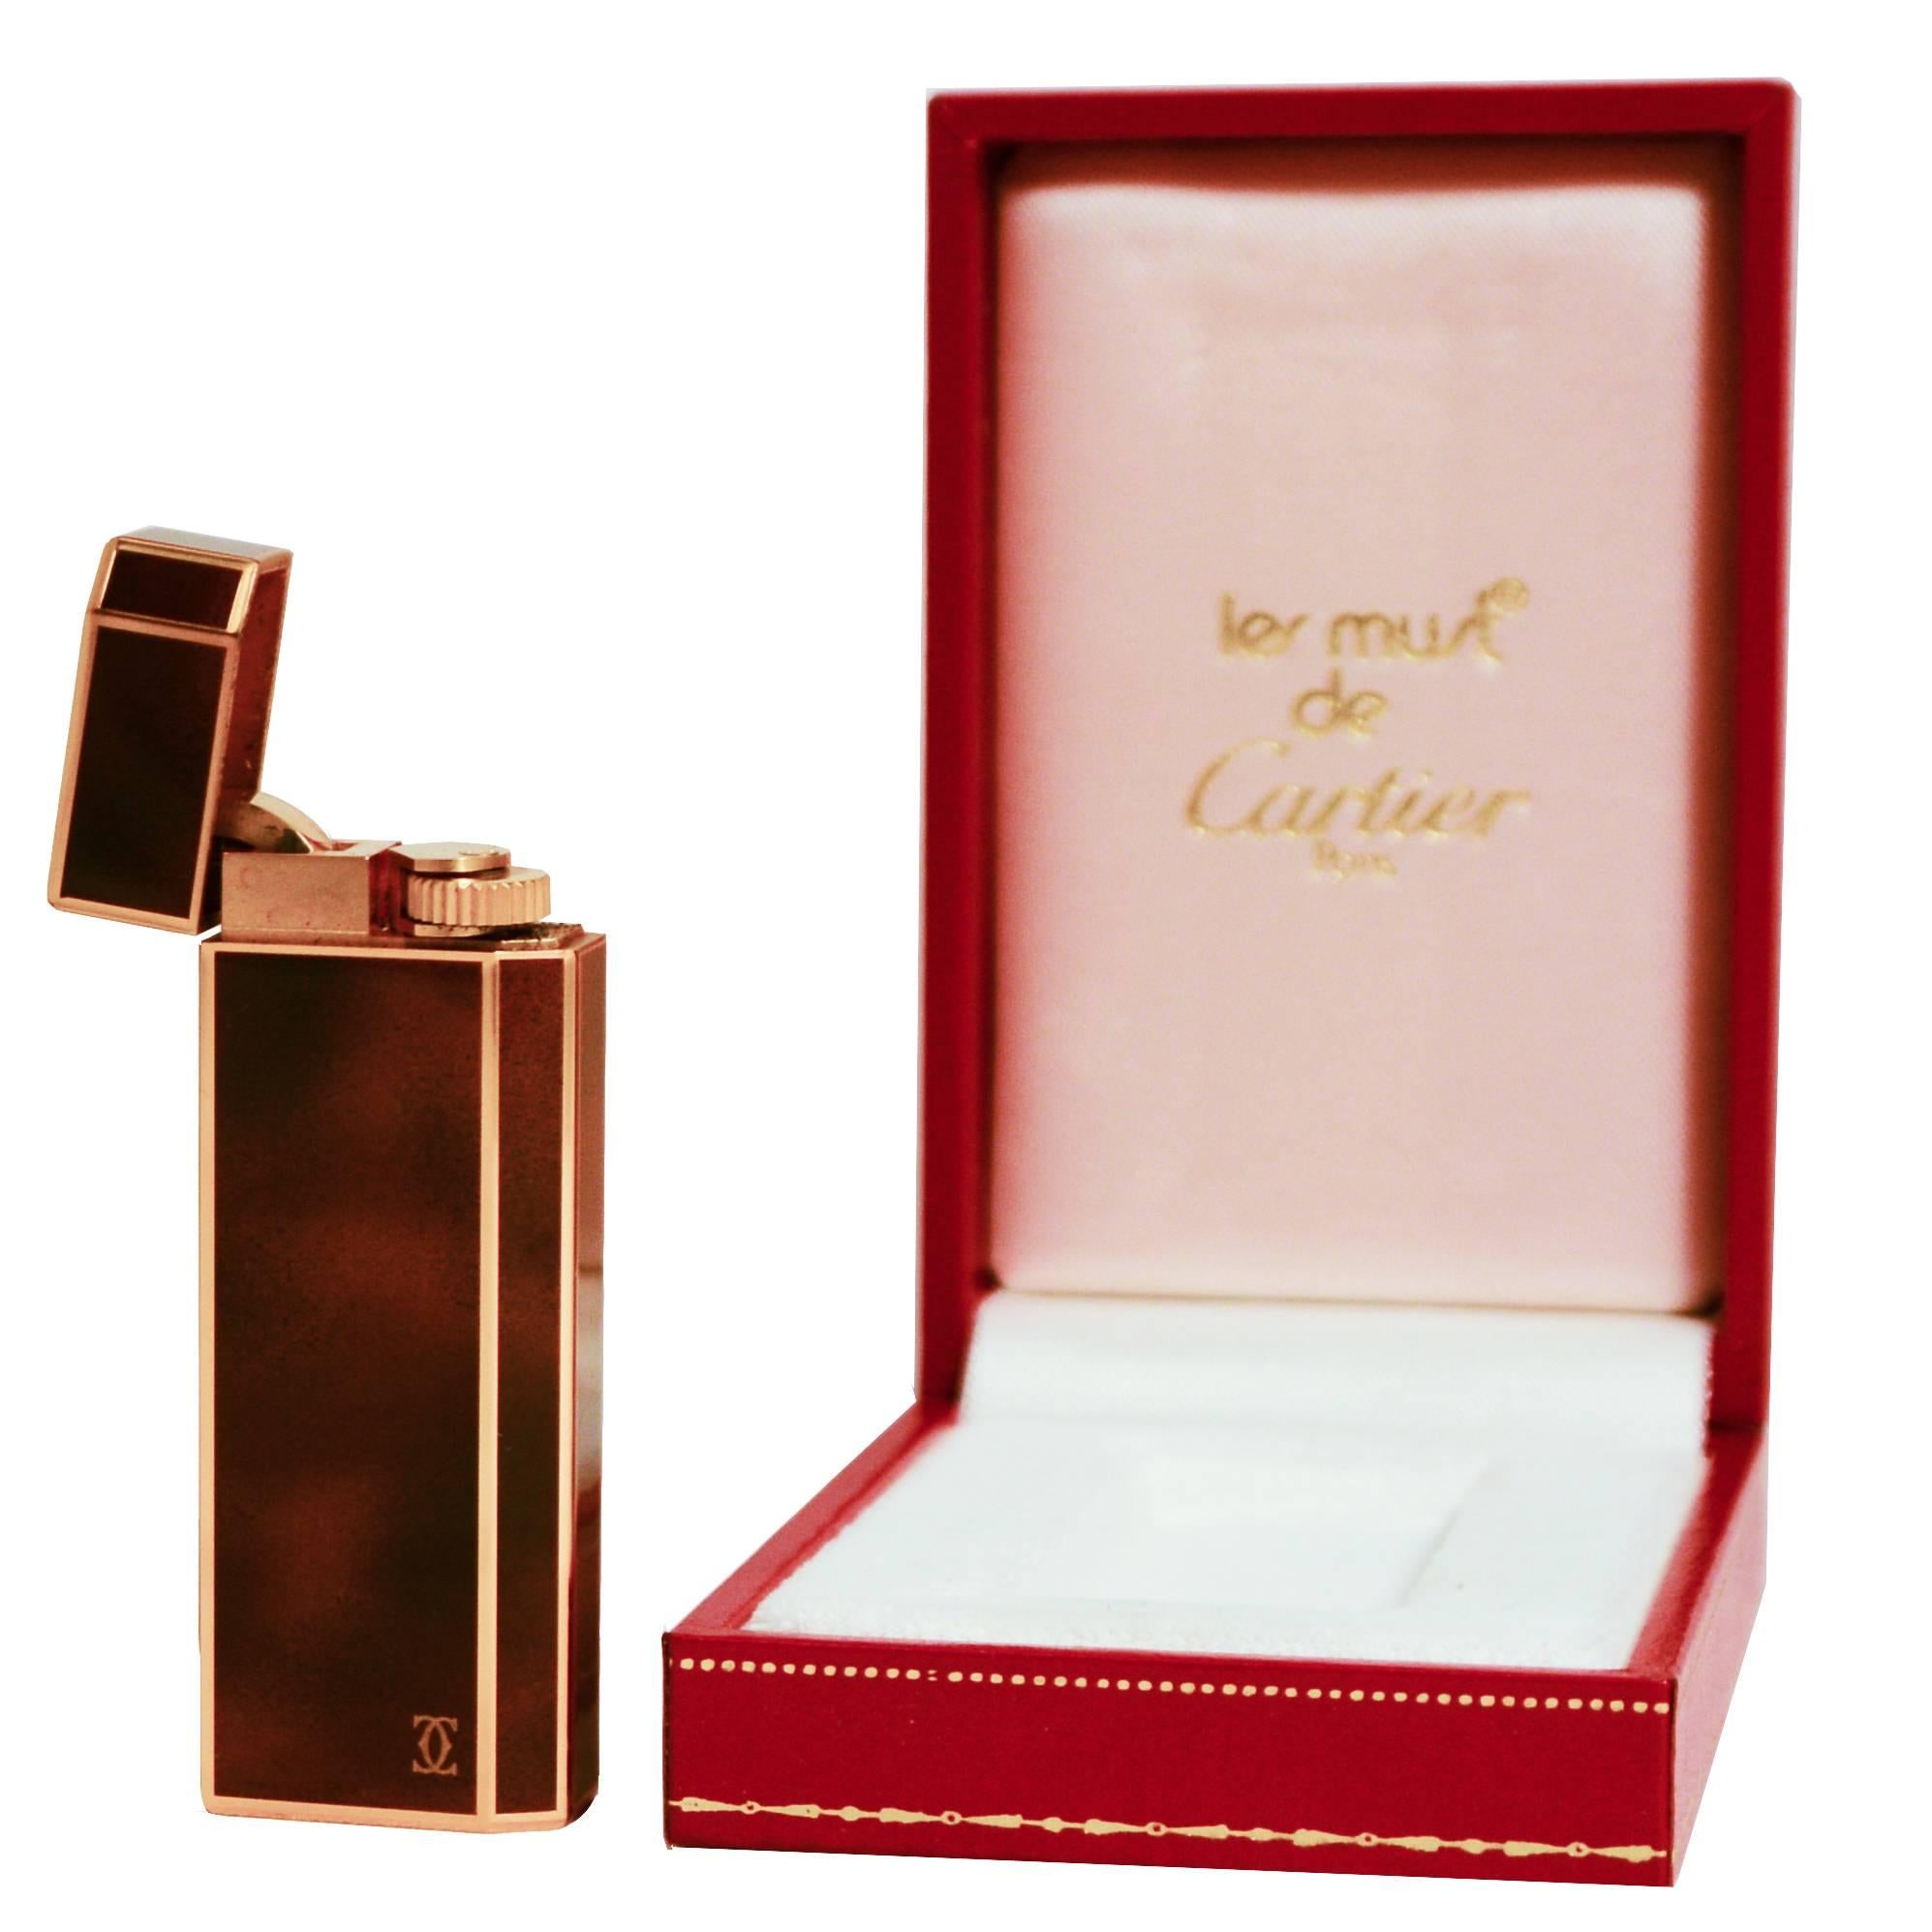 The lighter is brown with golden details 

Made in France 
Measures: 2.5 L x 7 H x 1 W cm.